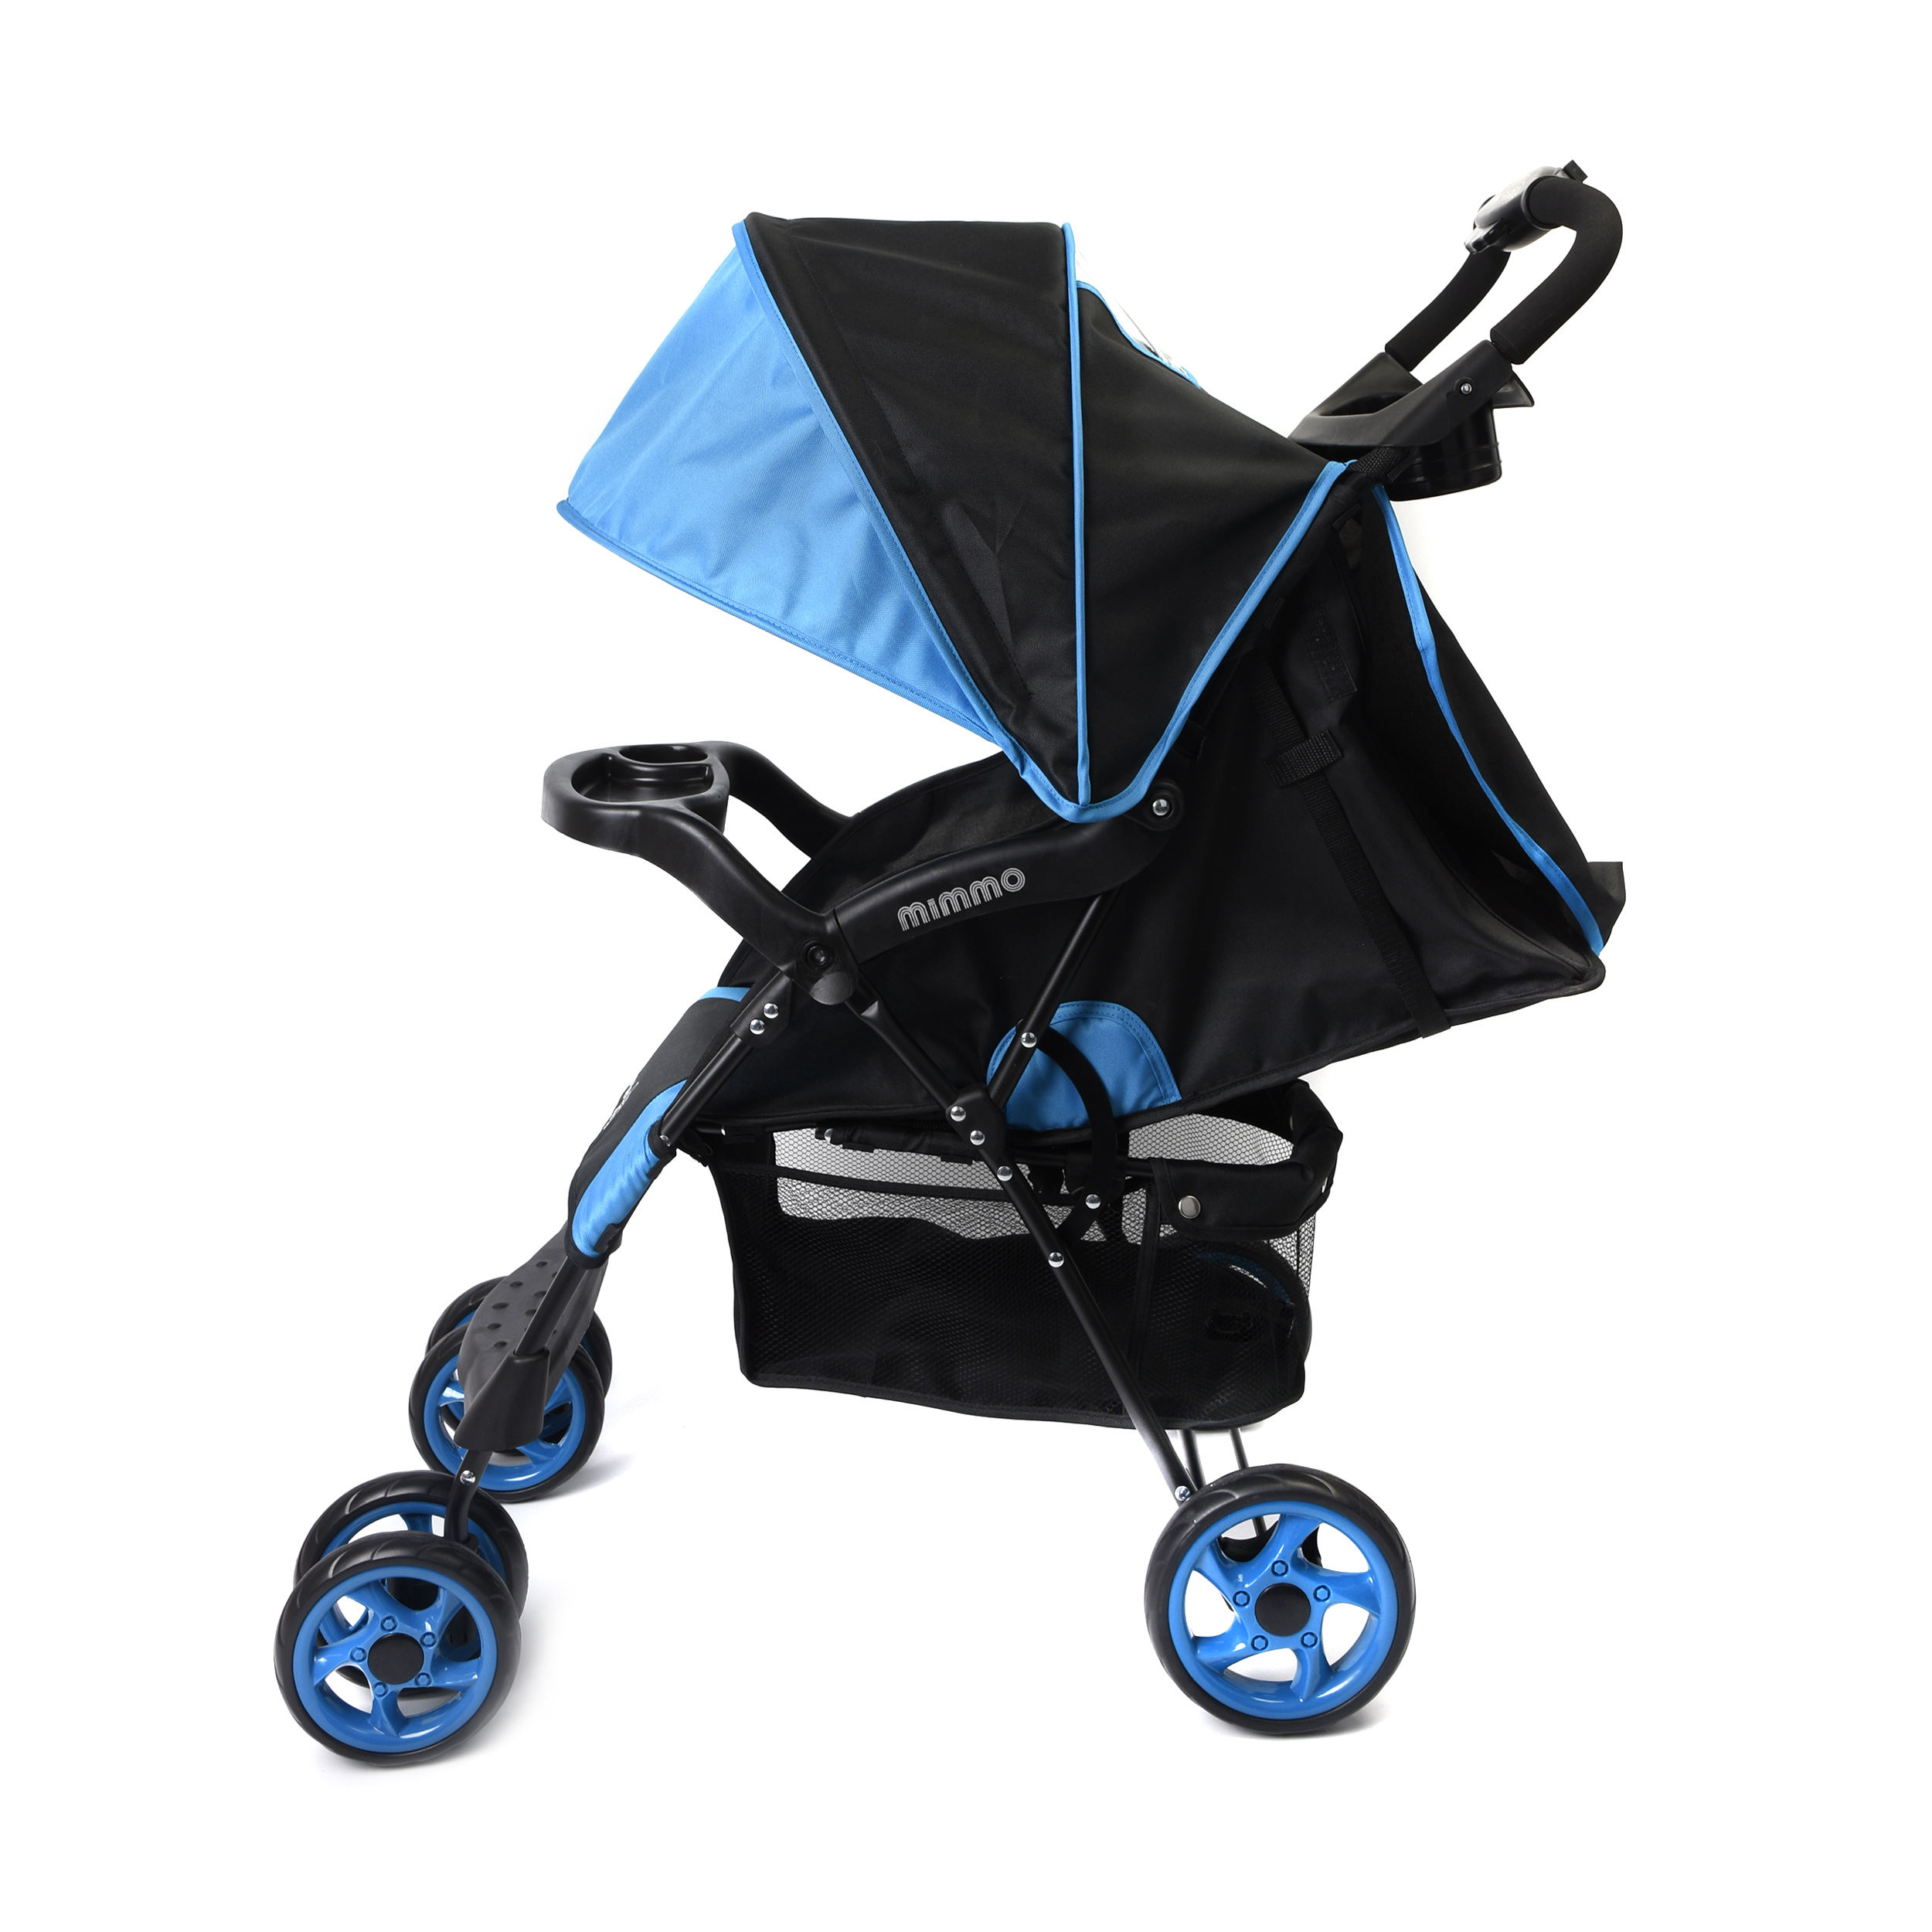 Wonder buggy Mimmo Deluxe Lightweight Stroller, Teal Blue - image 2 of 6